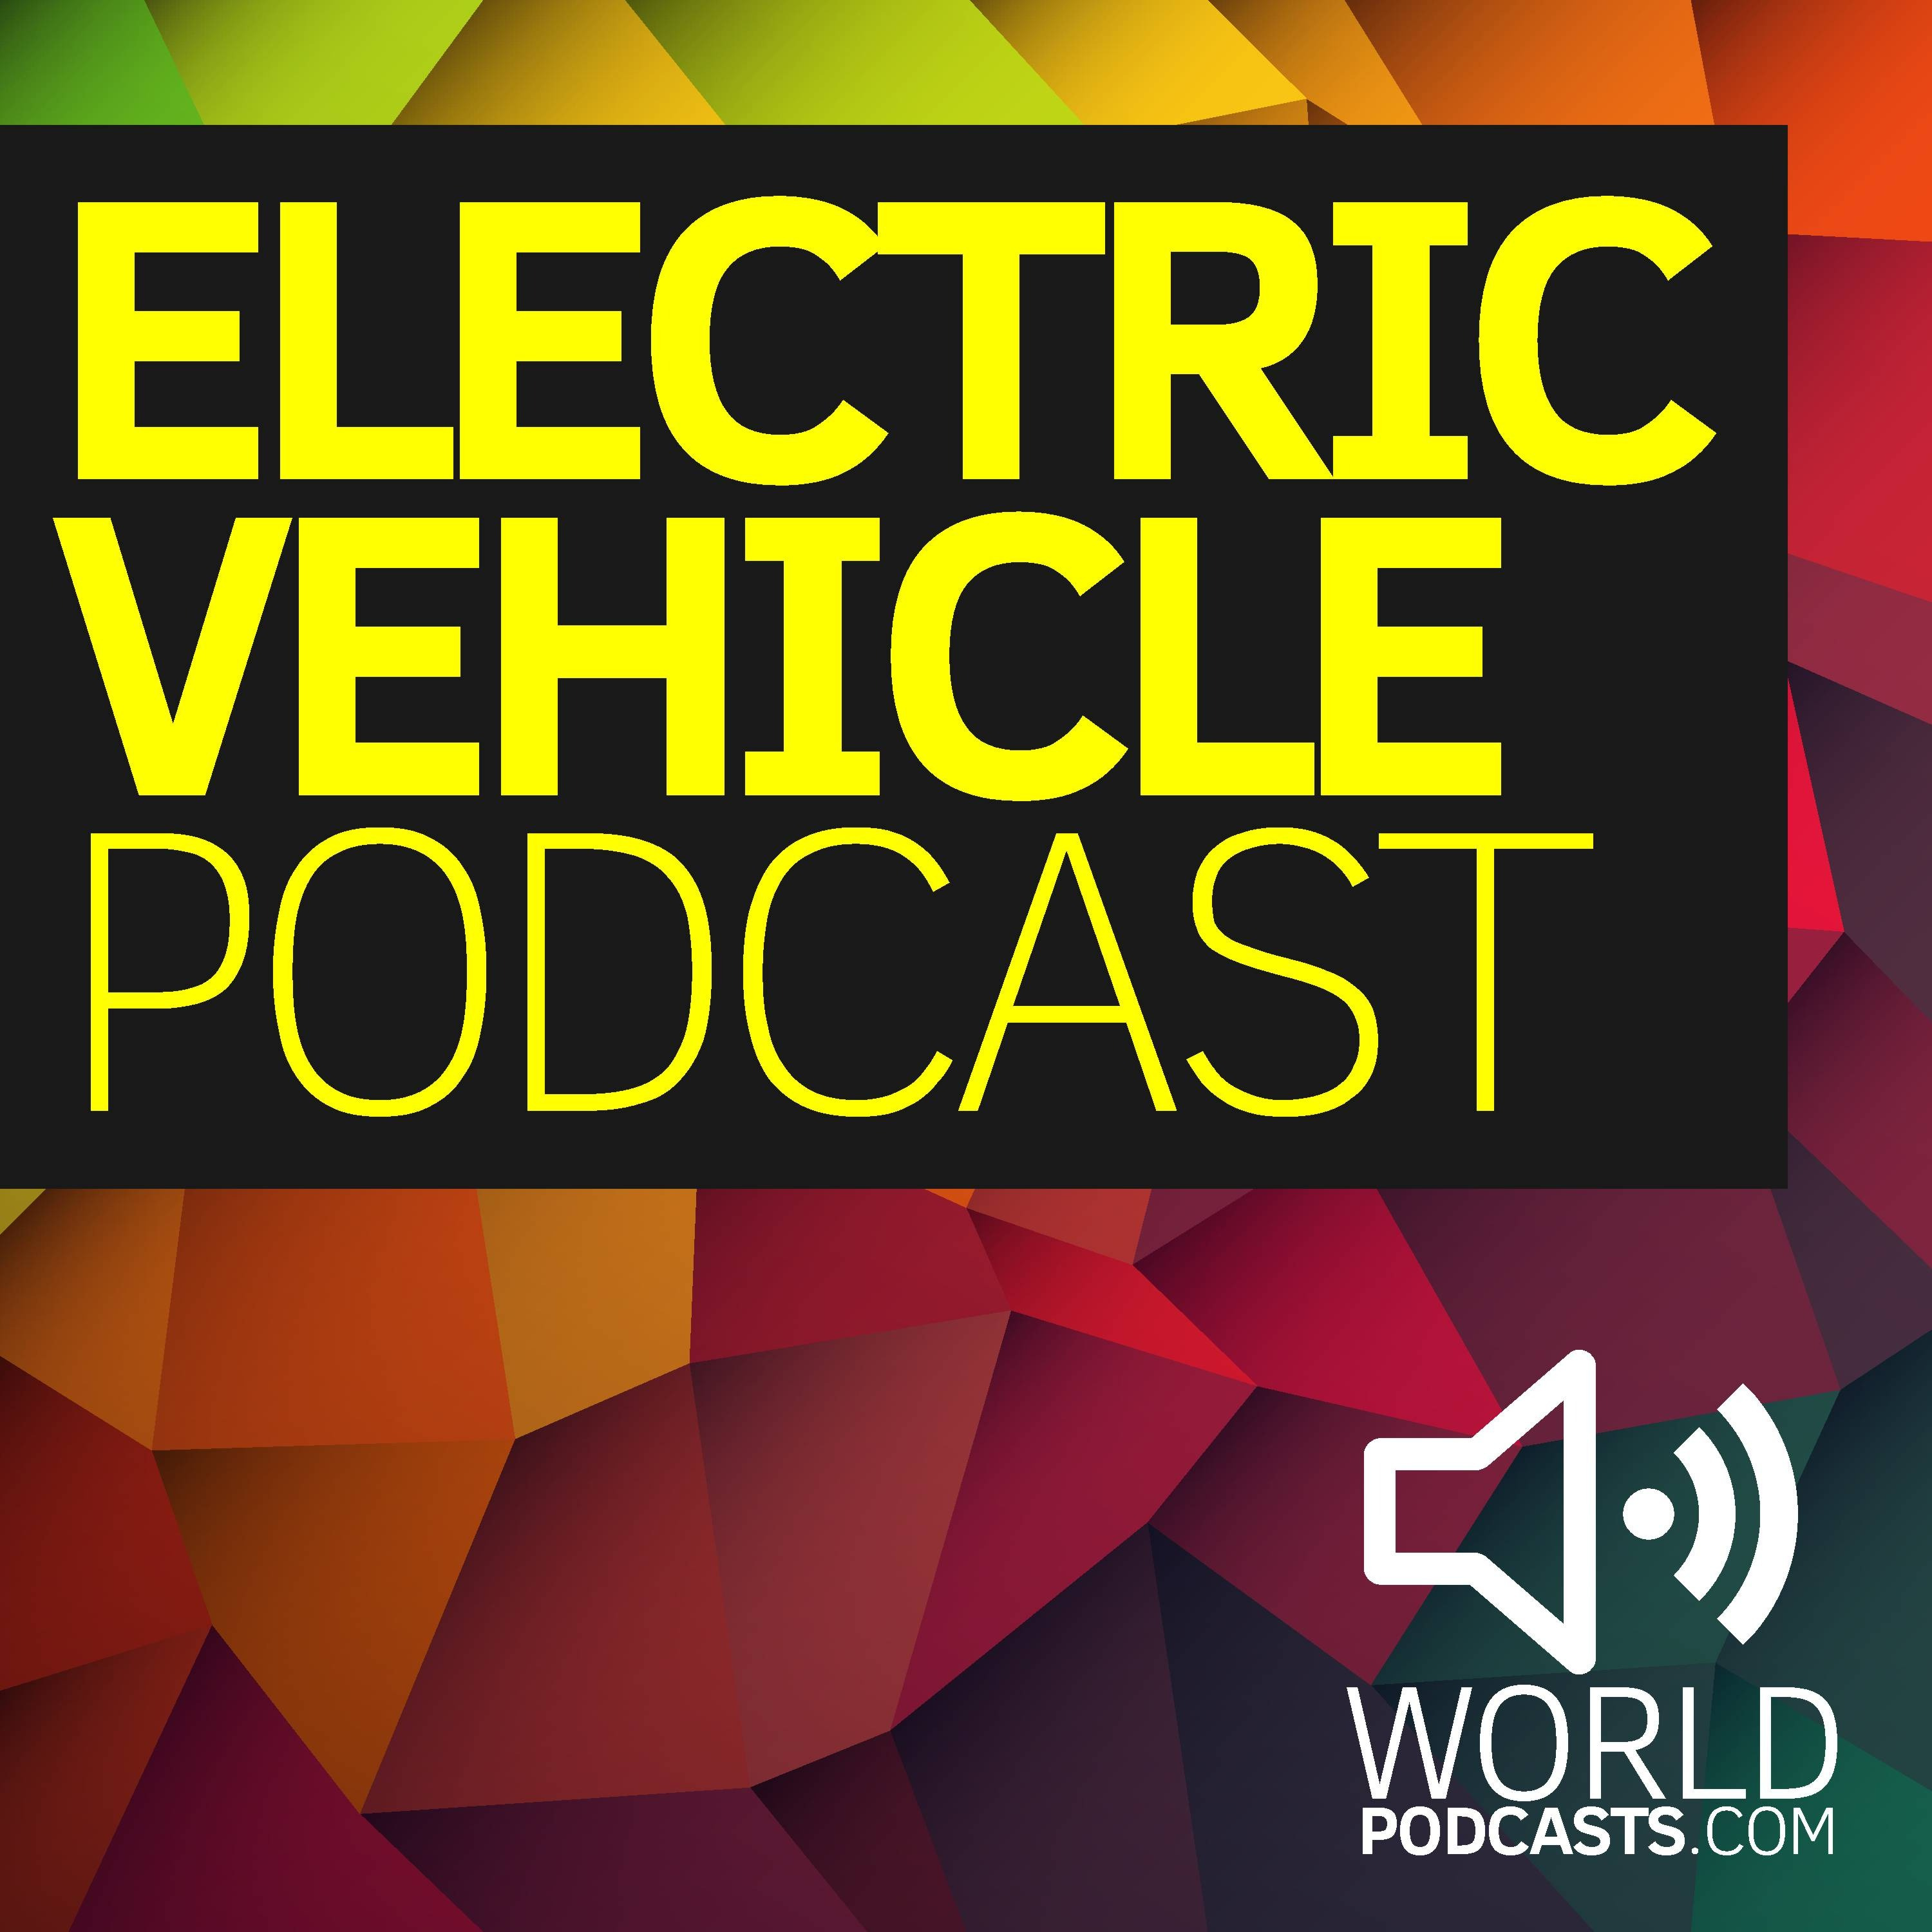 Electric Vehicle Podcast: EV news and discussions